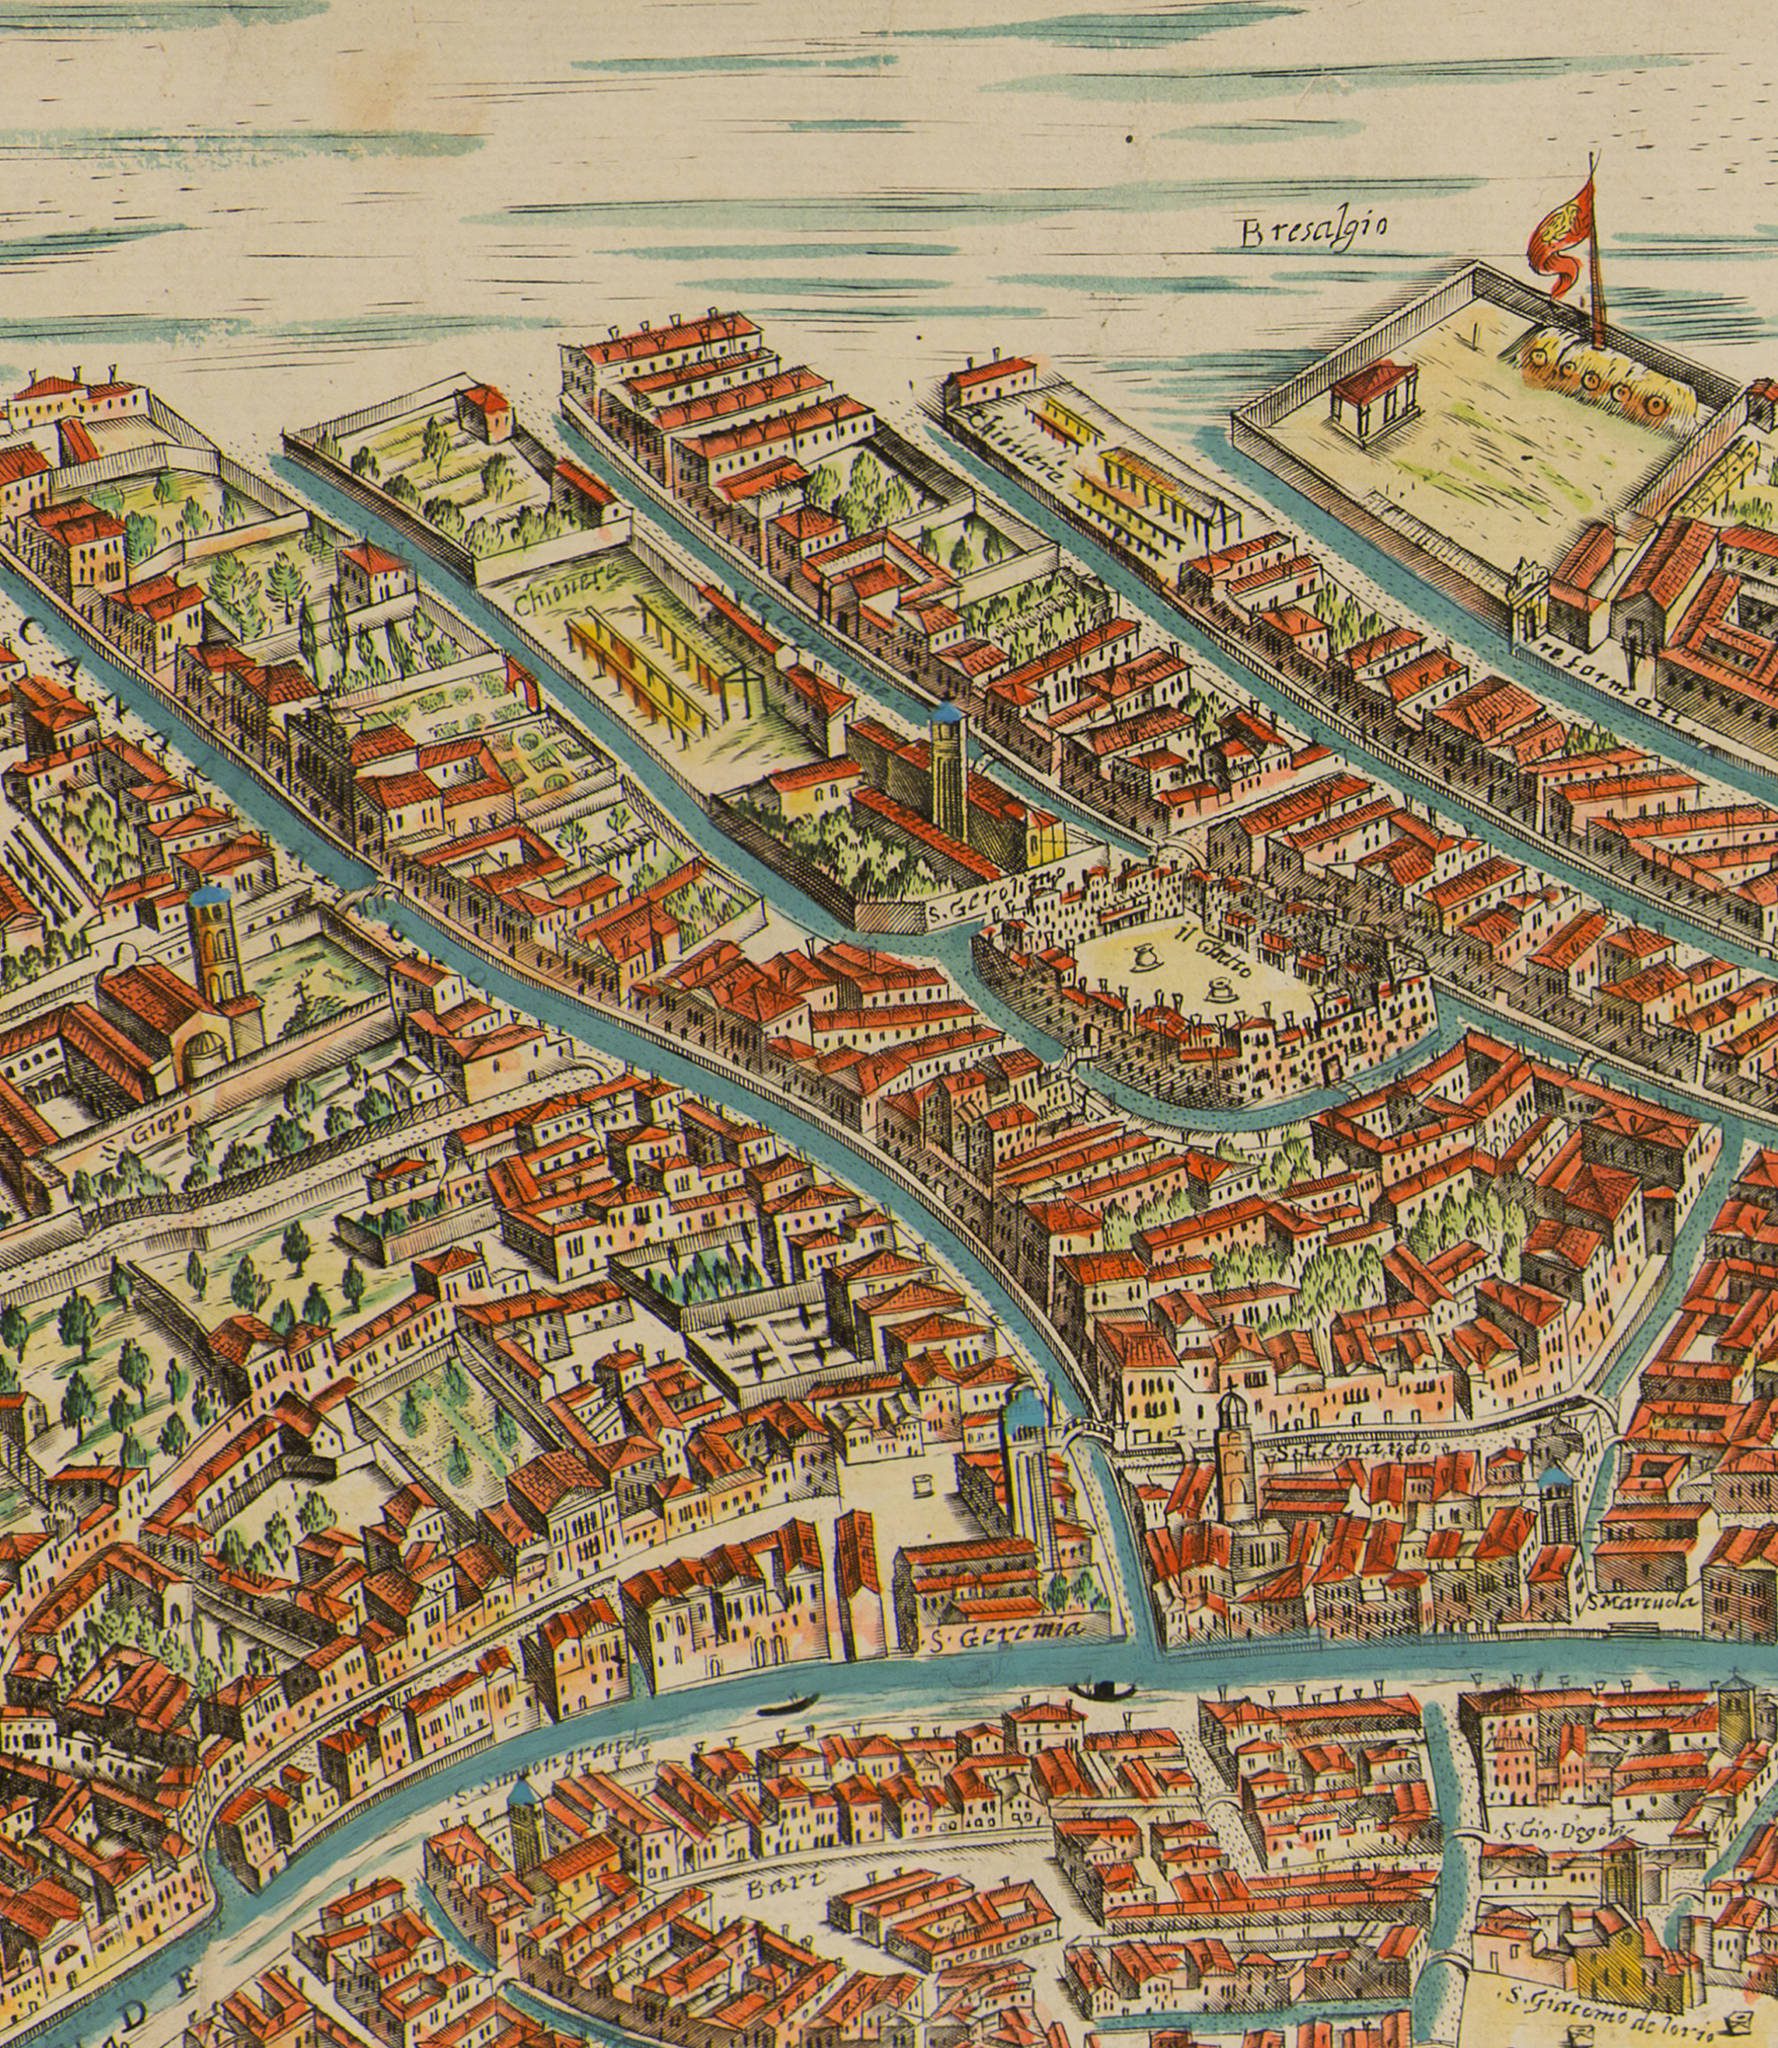 Detail of the Venetian ghetto from Giovanni Merlo’s 1676 map, Novacco 4F 288.